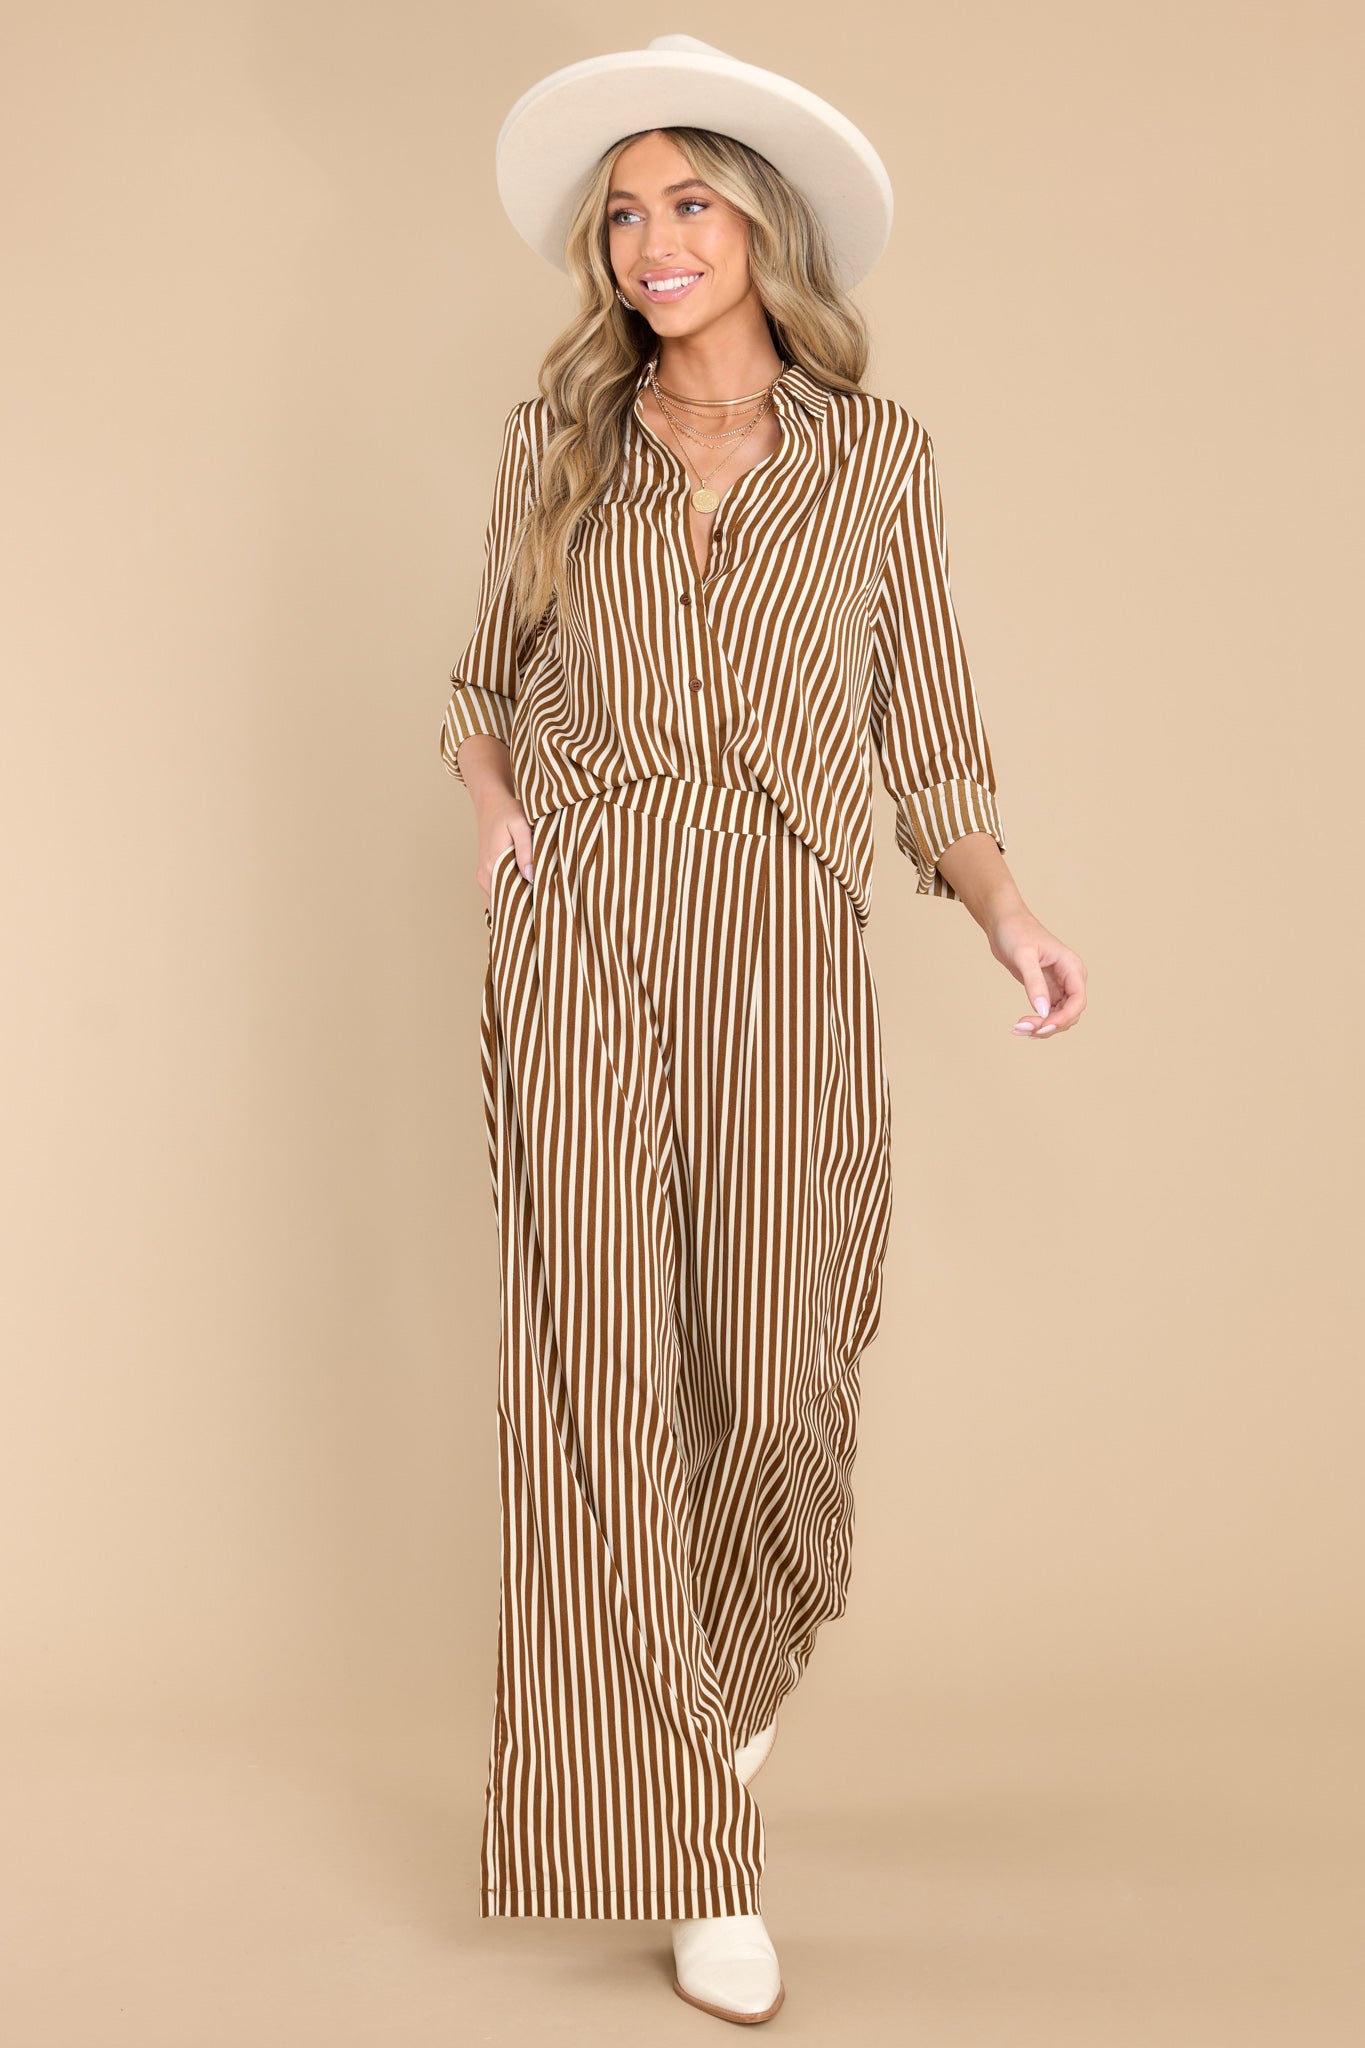 Freely Roaming Brown Striped Pants - Red Dress